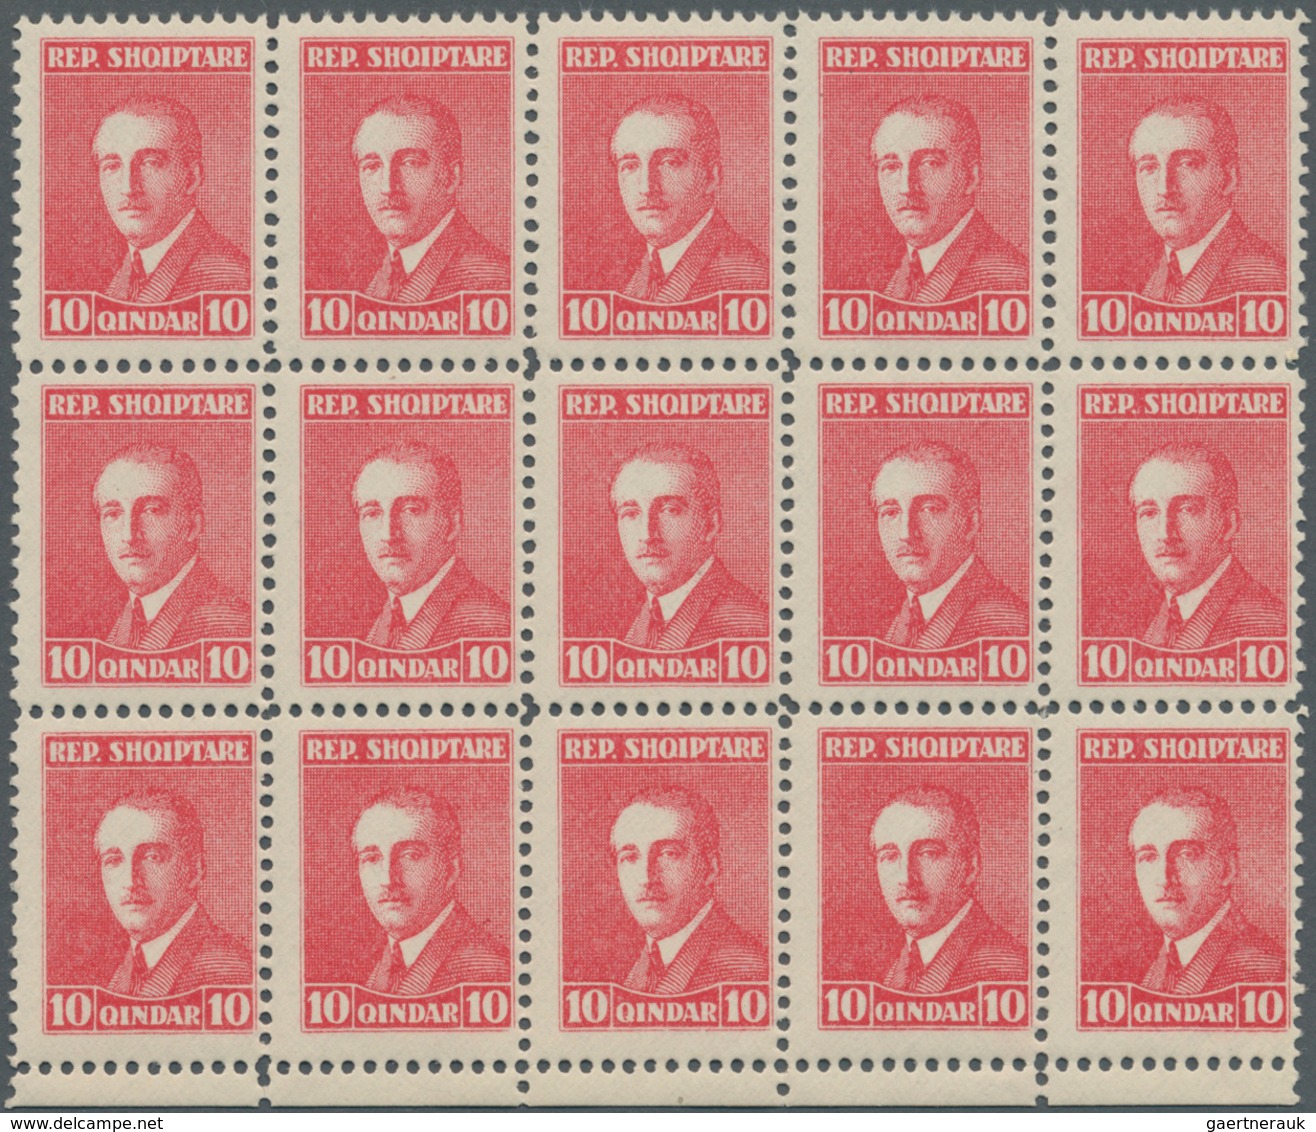 Albanien: 1925, Definitive Issue 'Achmed Zogu' 10q. Carmine With Scarce Perf. 11½ In A Lot With Abou - Albanie